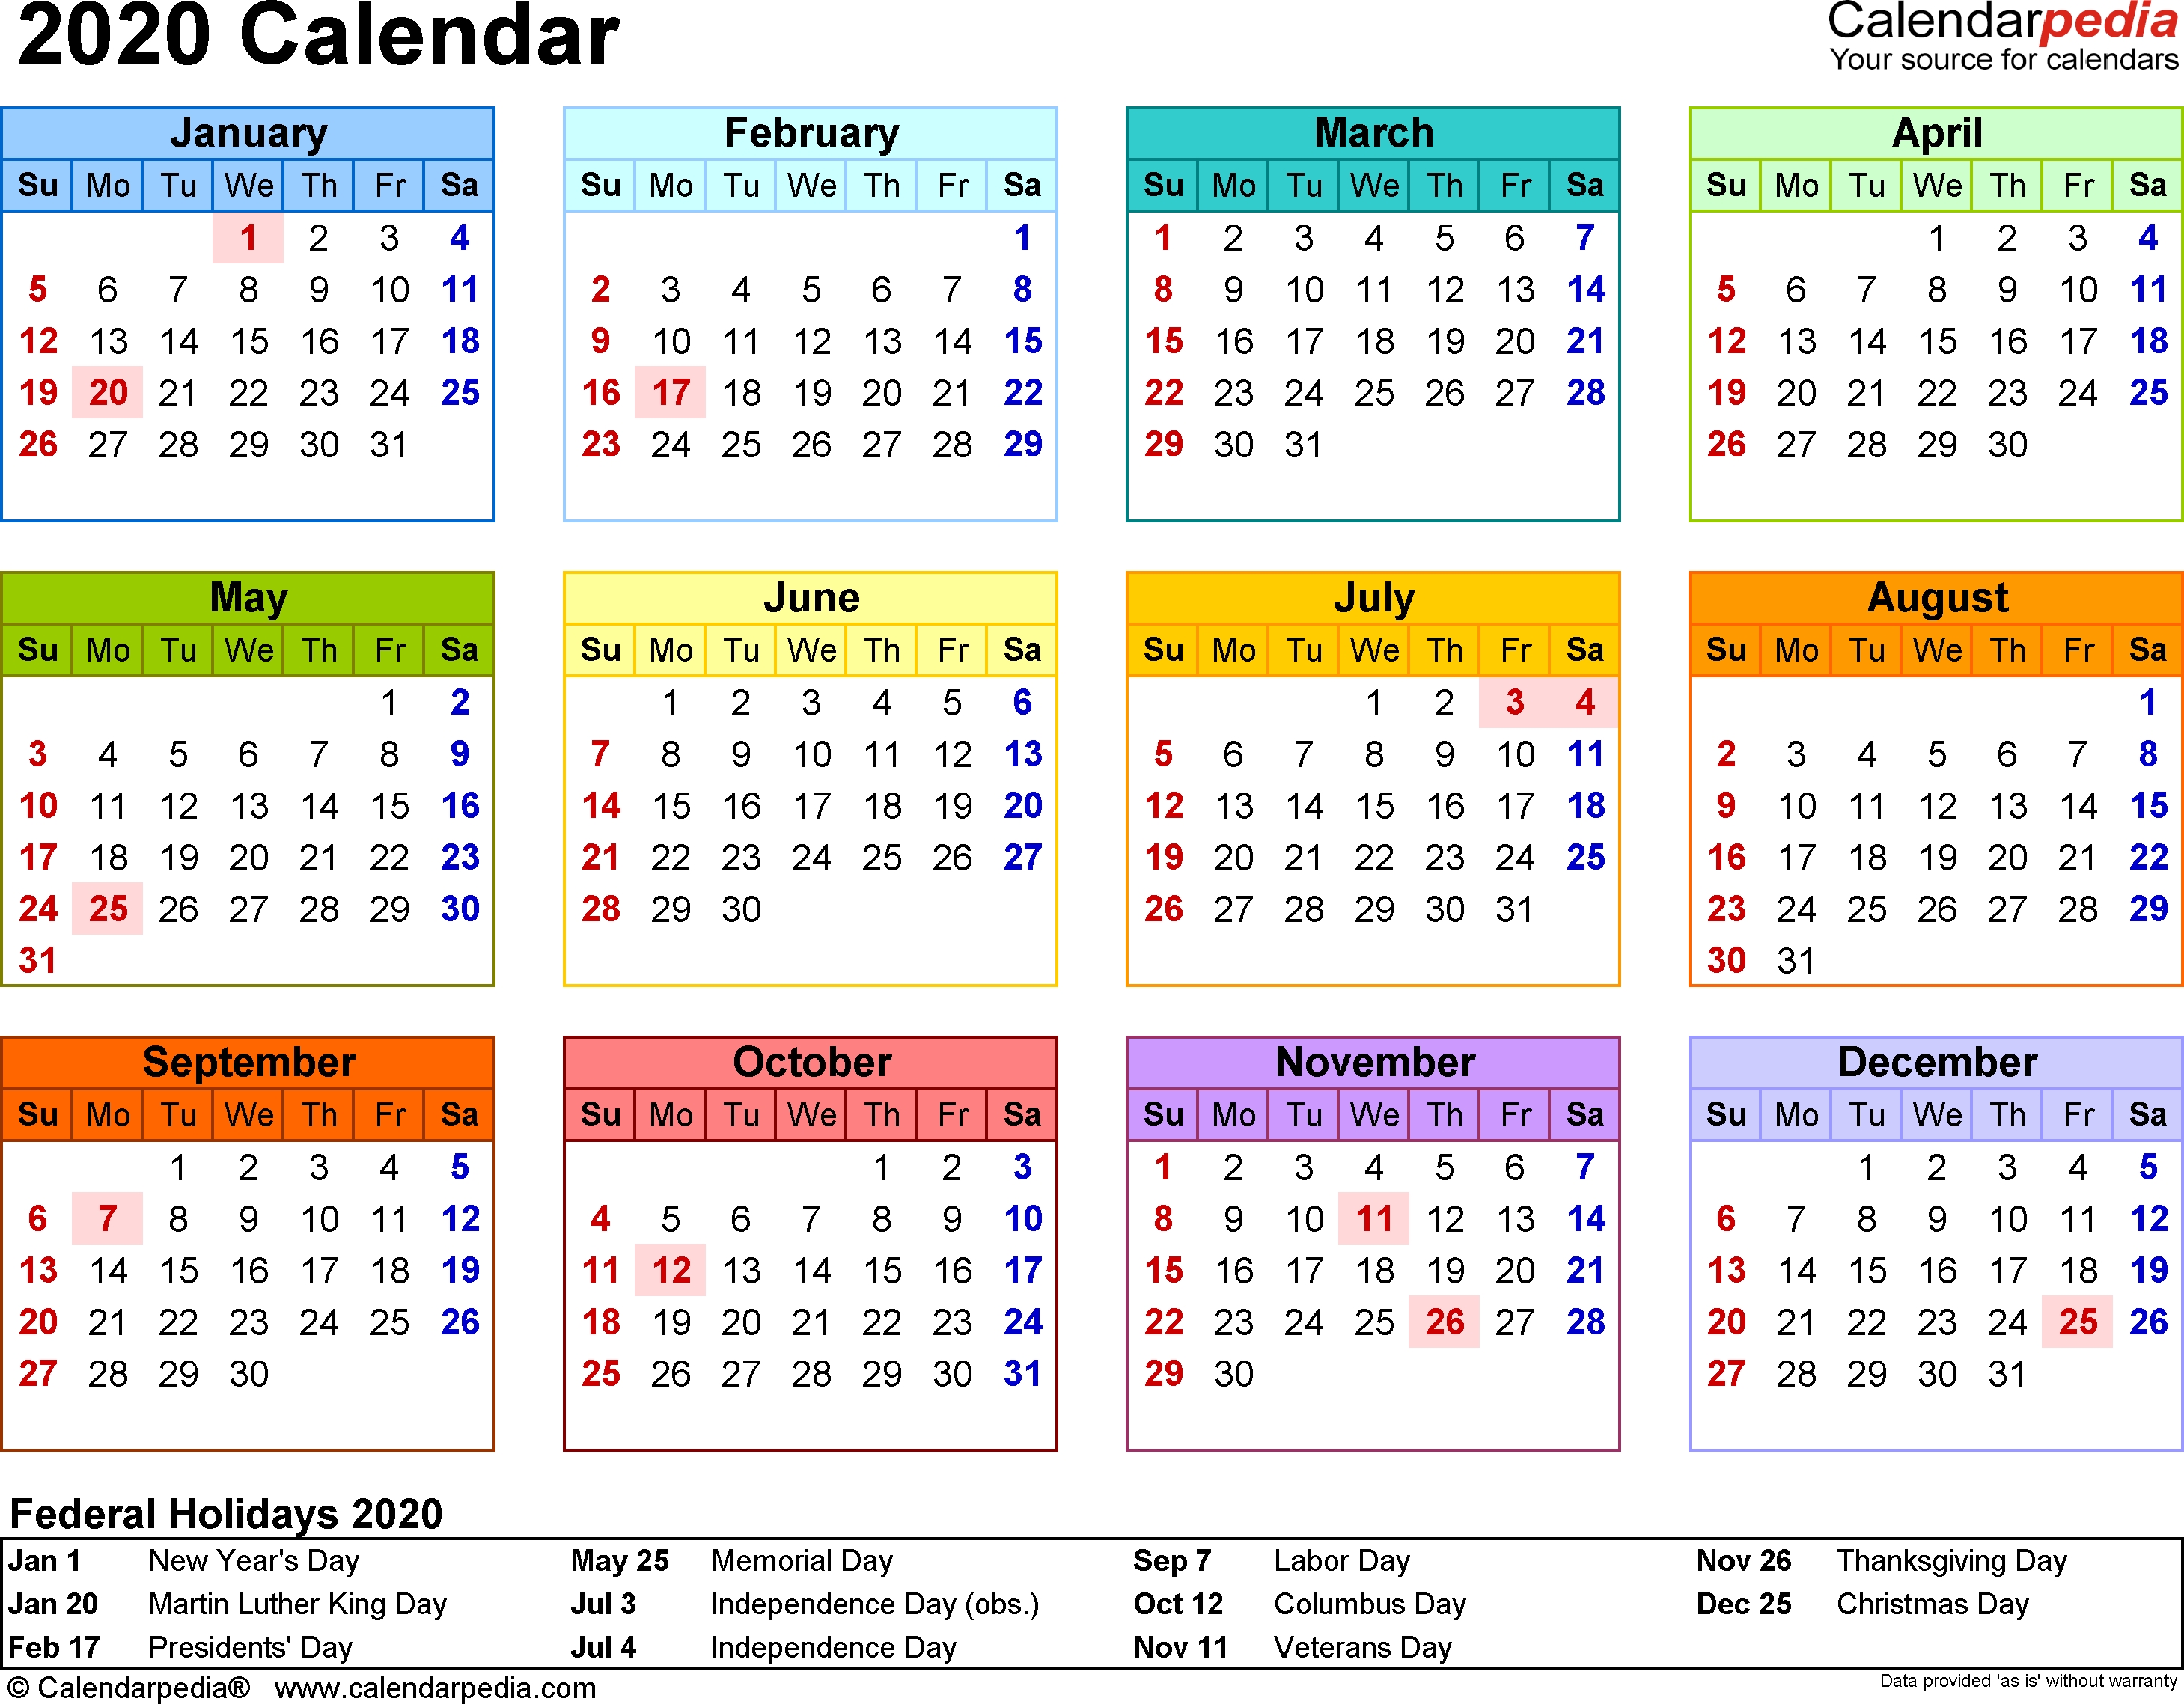 2020 Calendar - Download 18 Free Printable Excel Templates-January 2020 Calendar Philippines